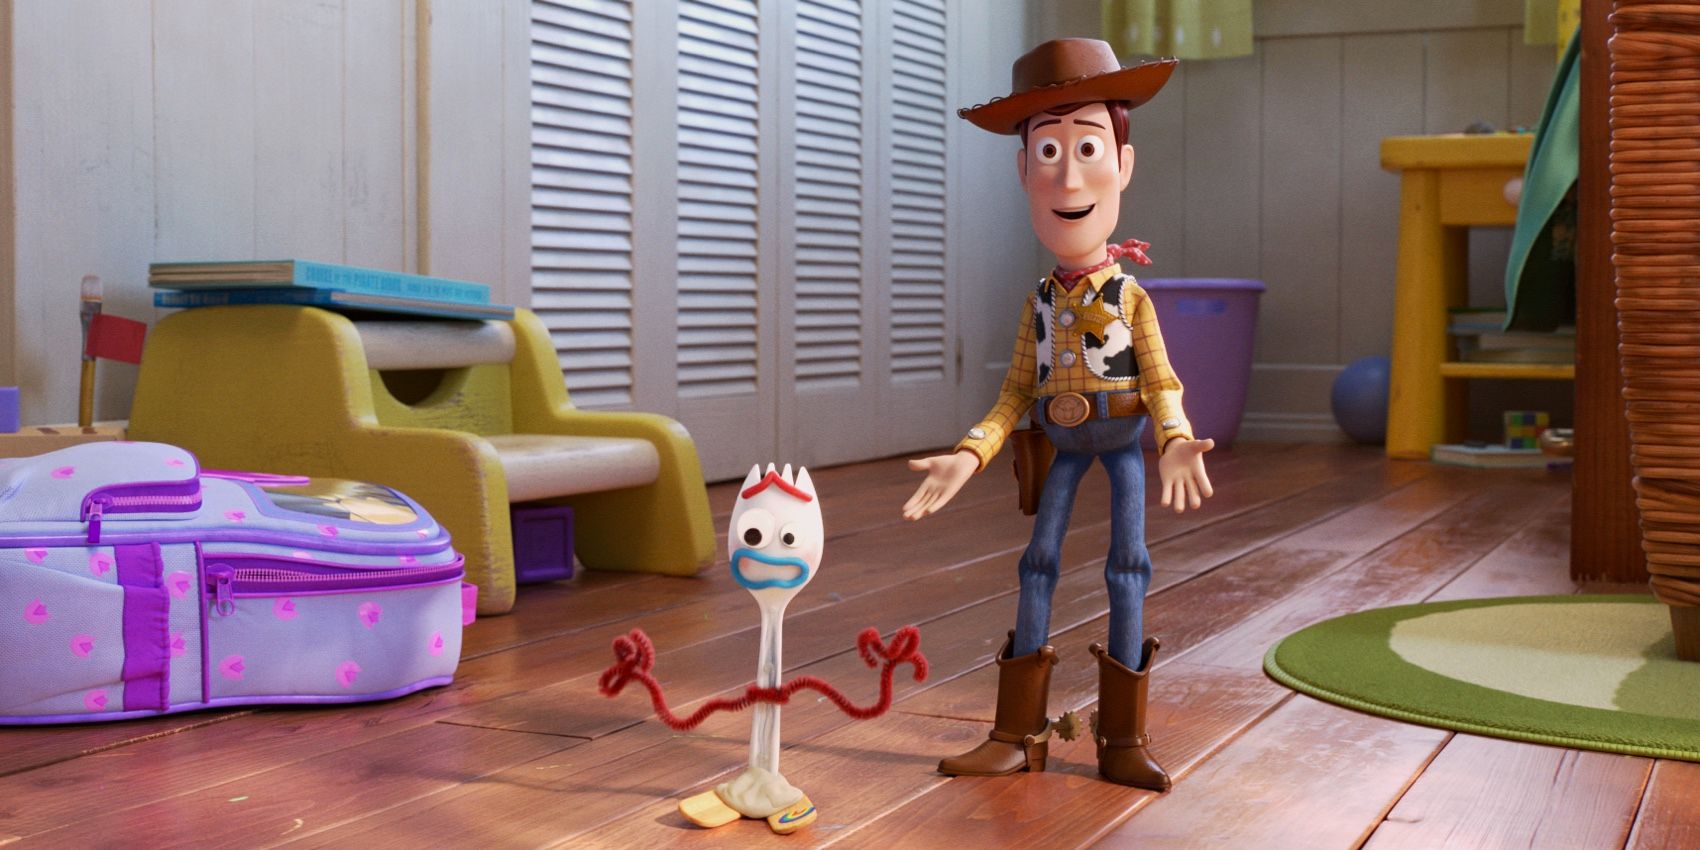 Toy Story 4 Tony Hale Interview About Forkys Origin & Life